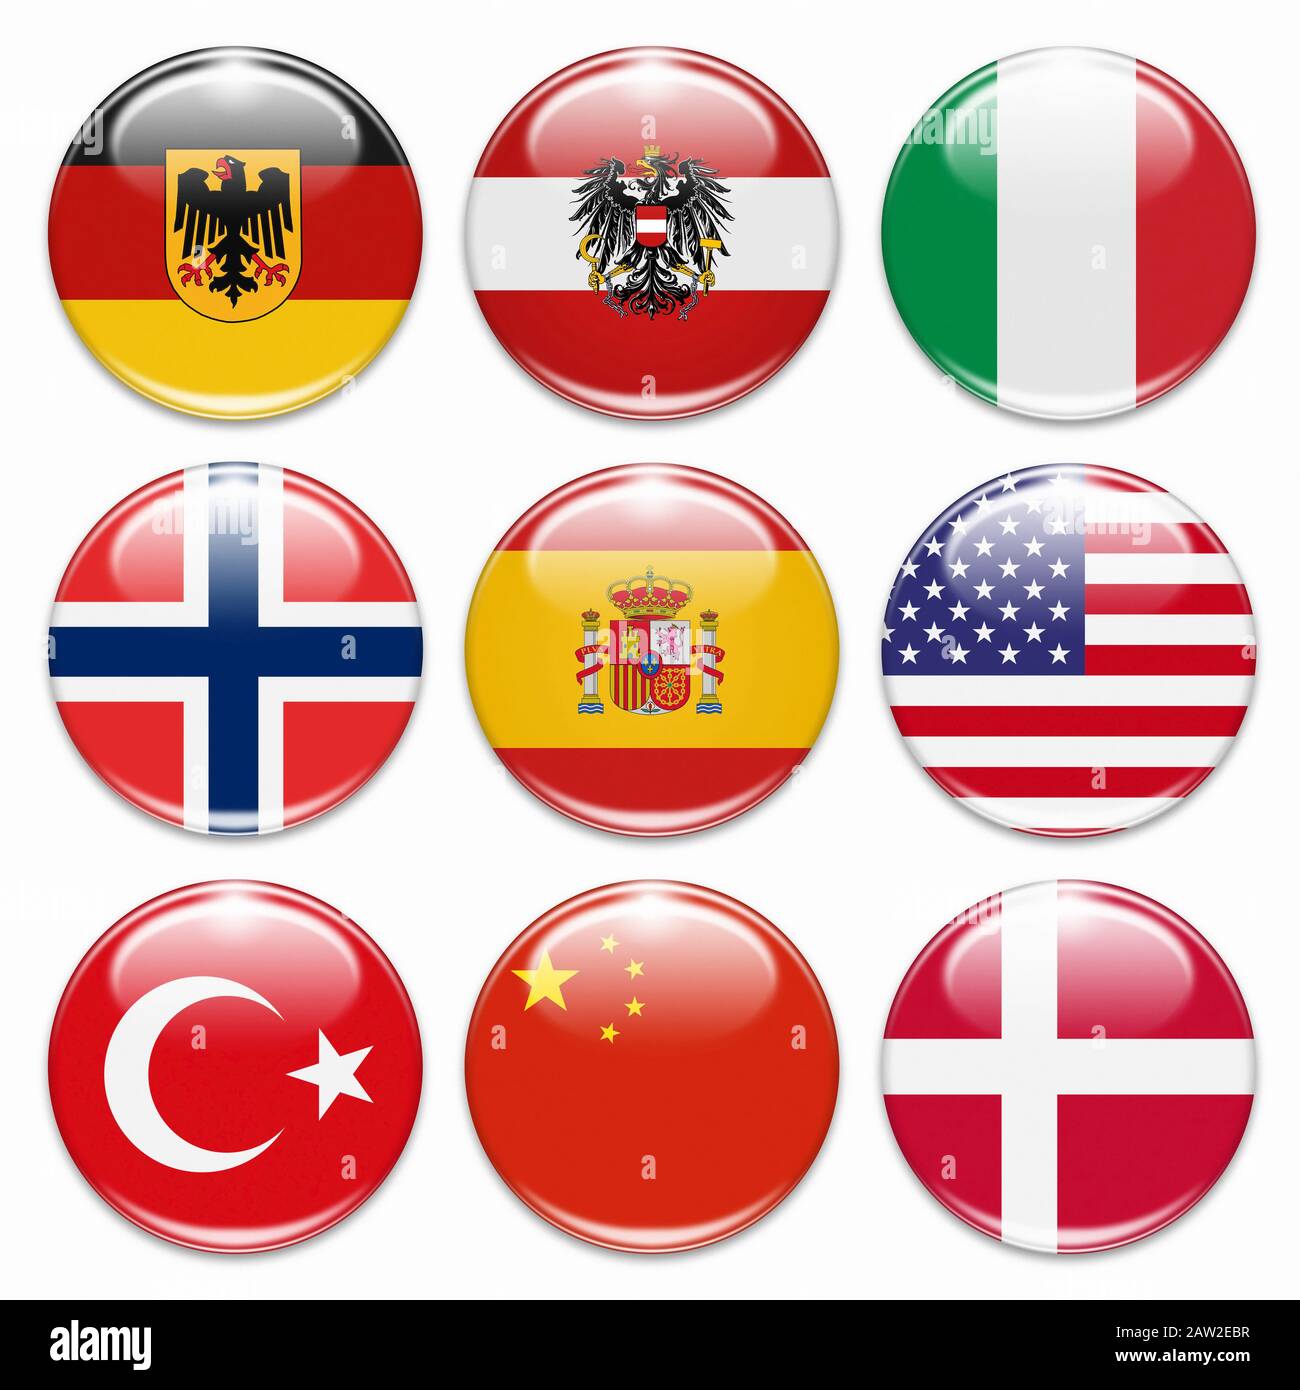 buttons of  germany, austria, italy, norway, spain, usa, turkey, china, and denmark isolated on white Stock Photo